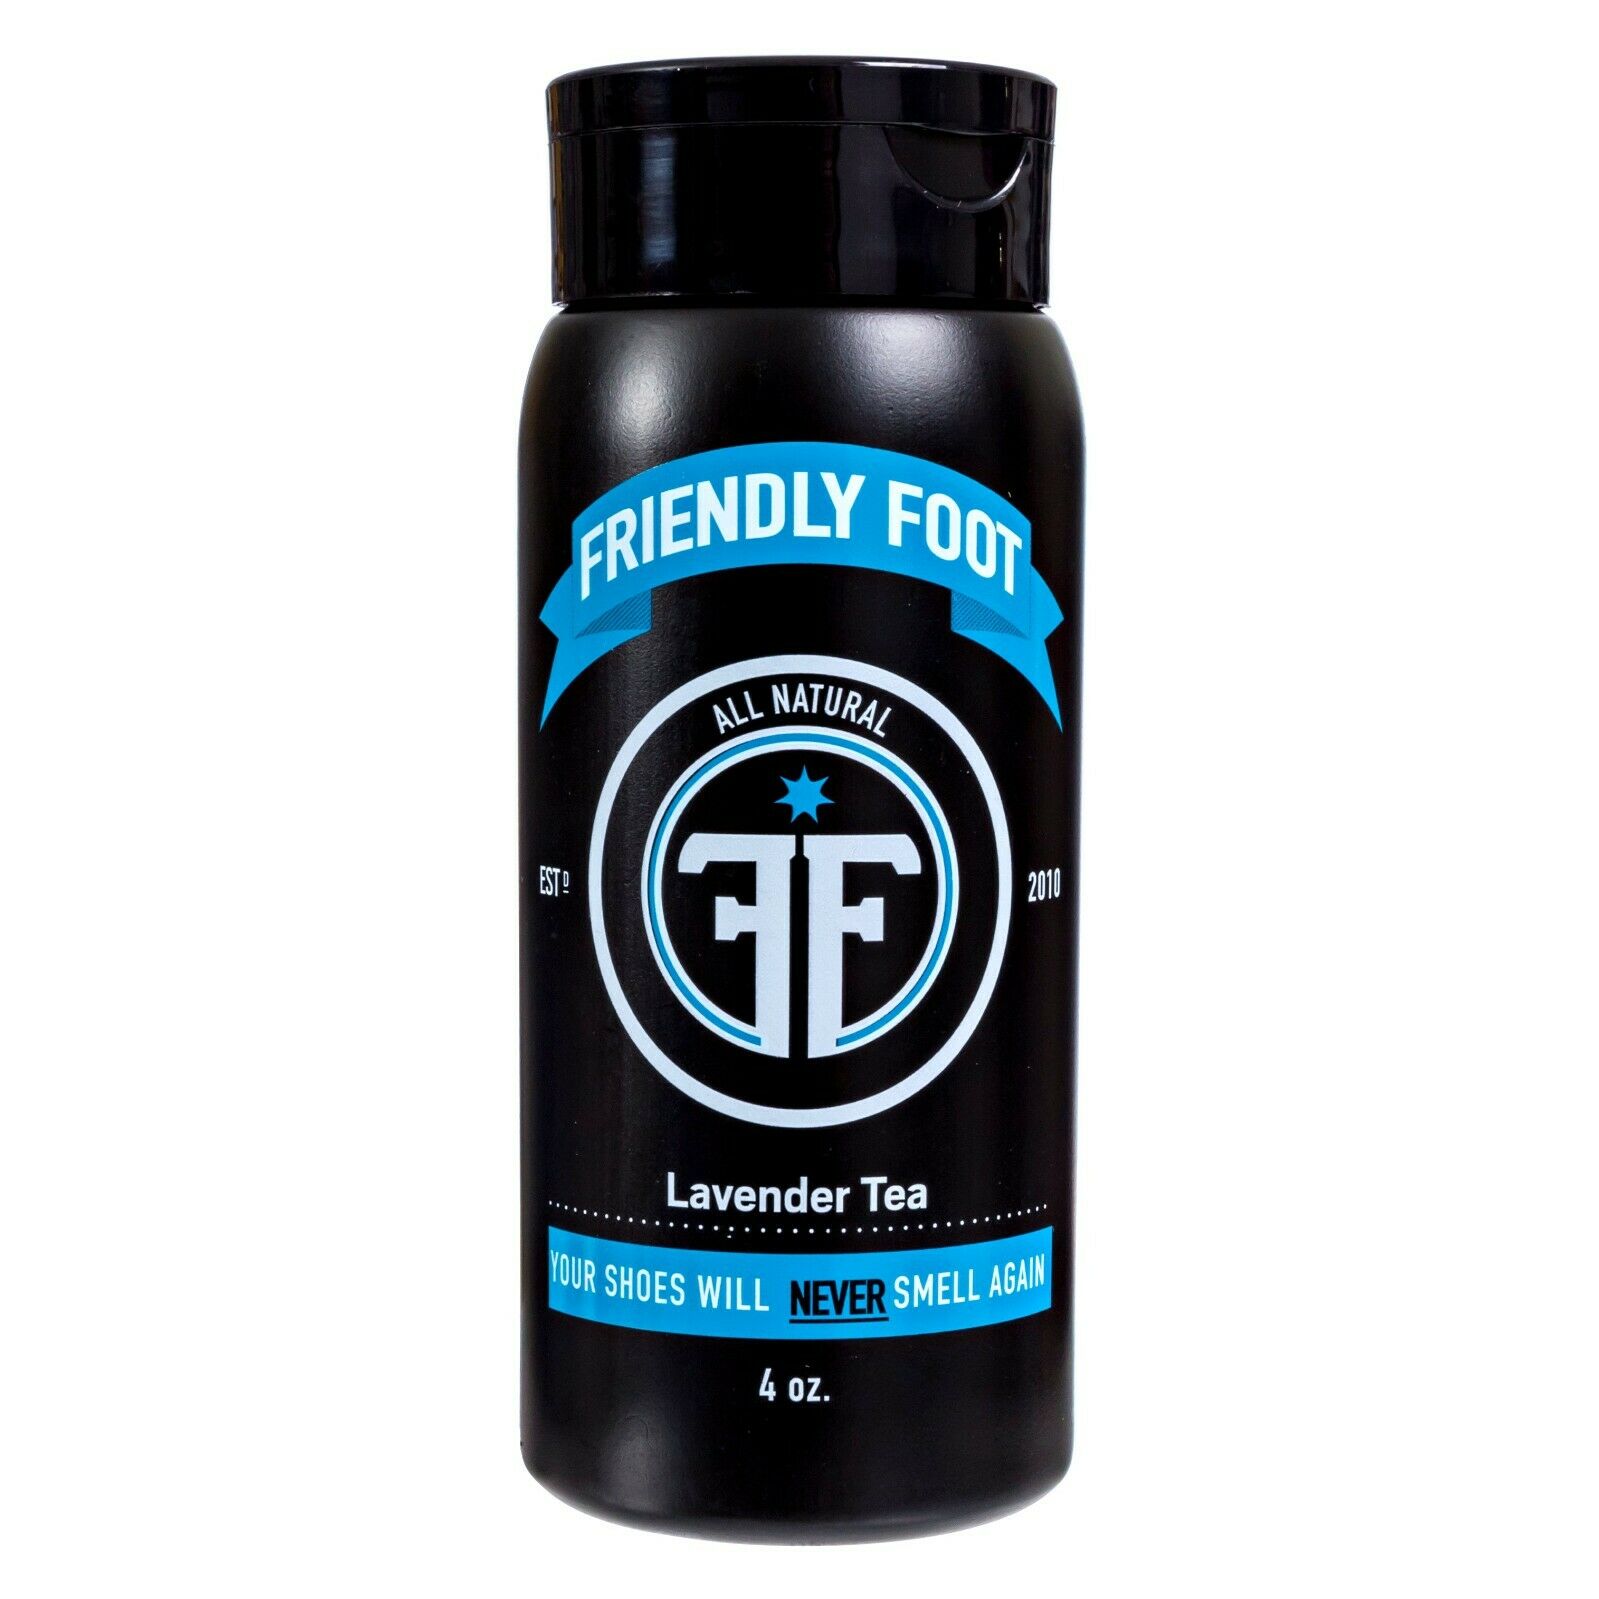 World's Best Shoe Deodorizer and Disinfectant-Your Shoes Will Never Smell Again!